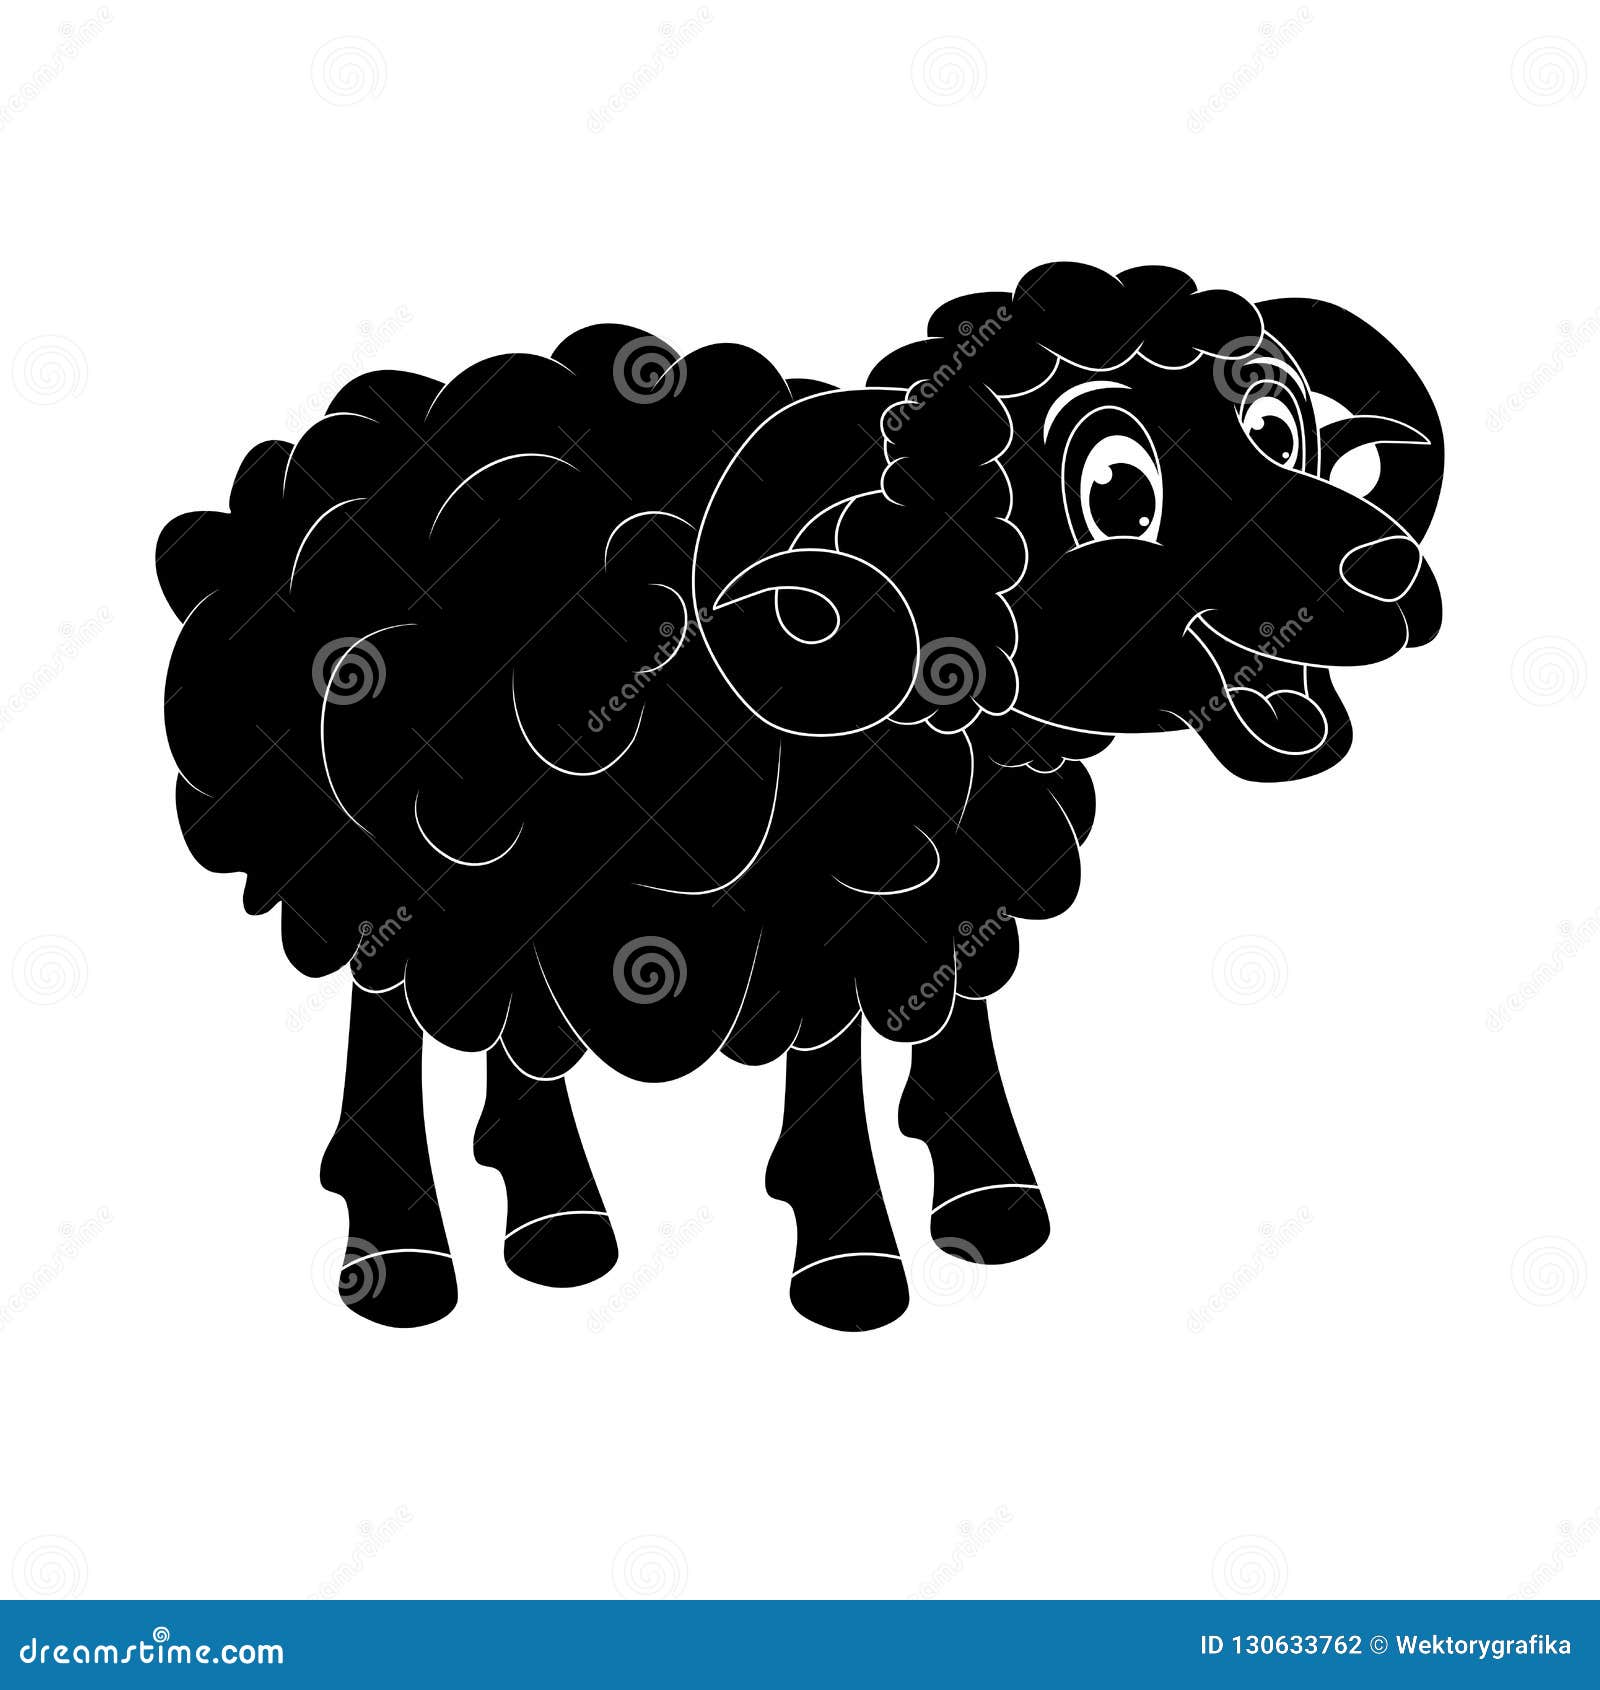 Download Cartoon Silhouette Ram Design Isolated On White Background Stock Vector - Illustration of mammal ...